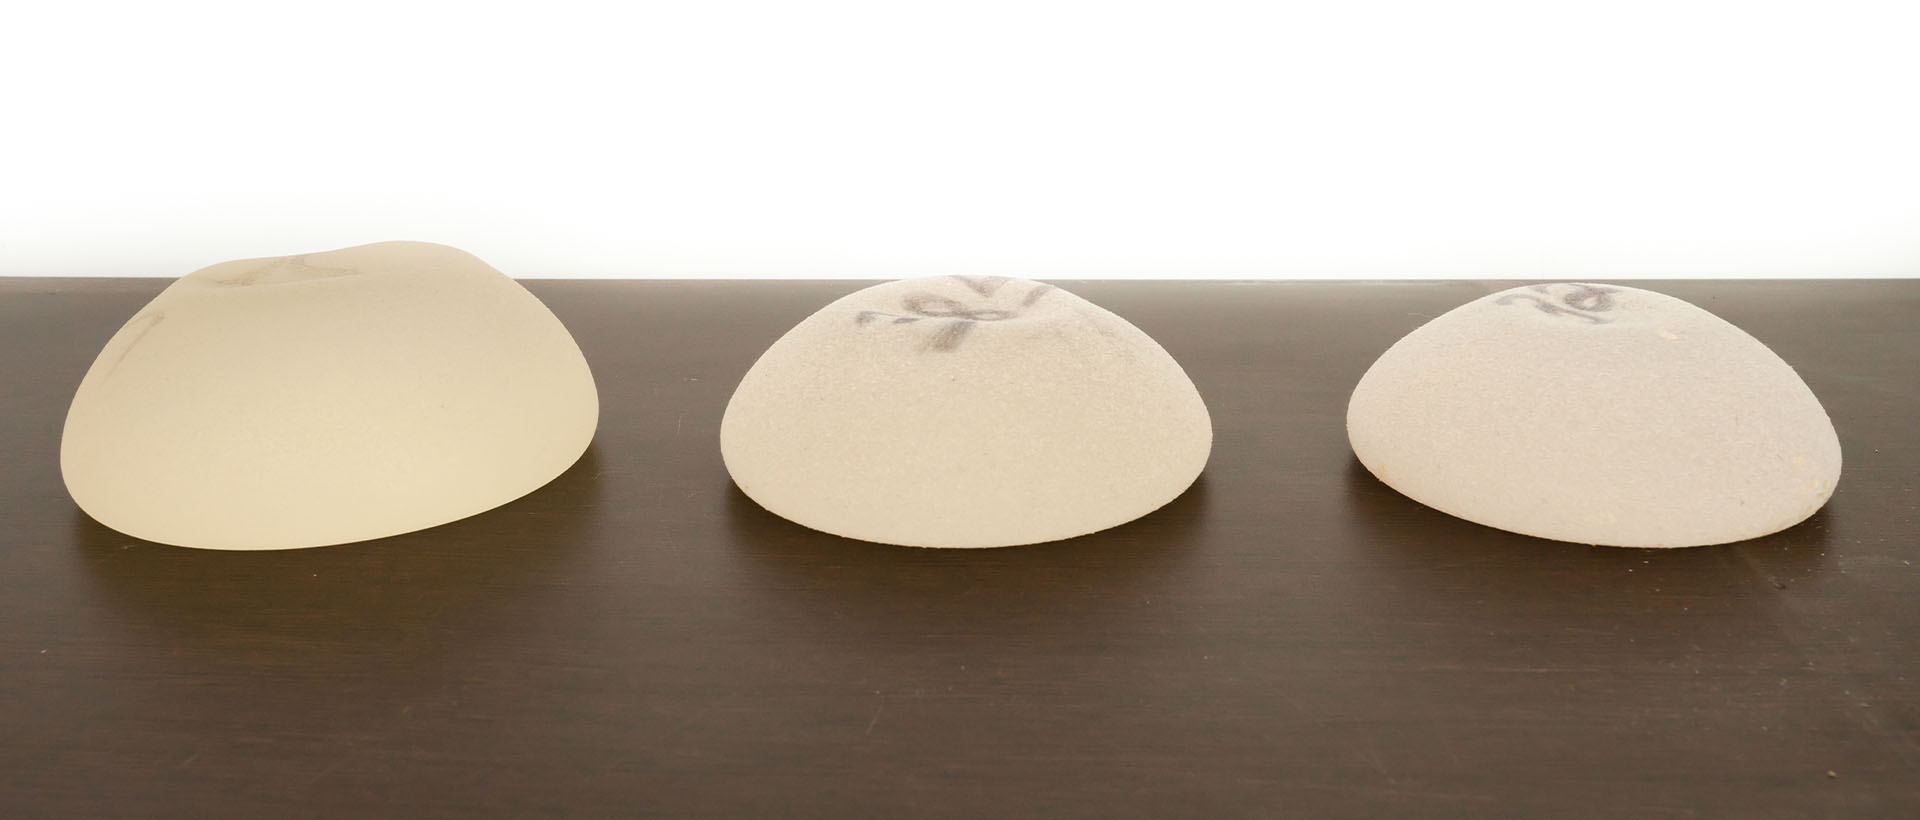 Breast Implants, various sizes on White background